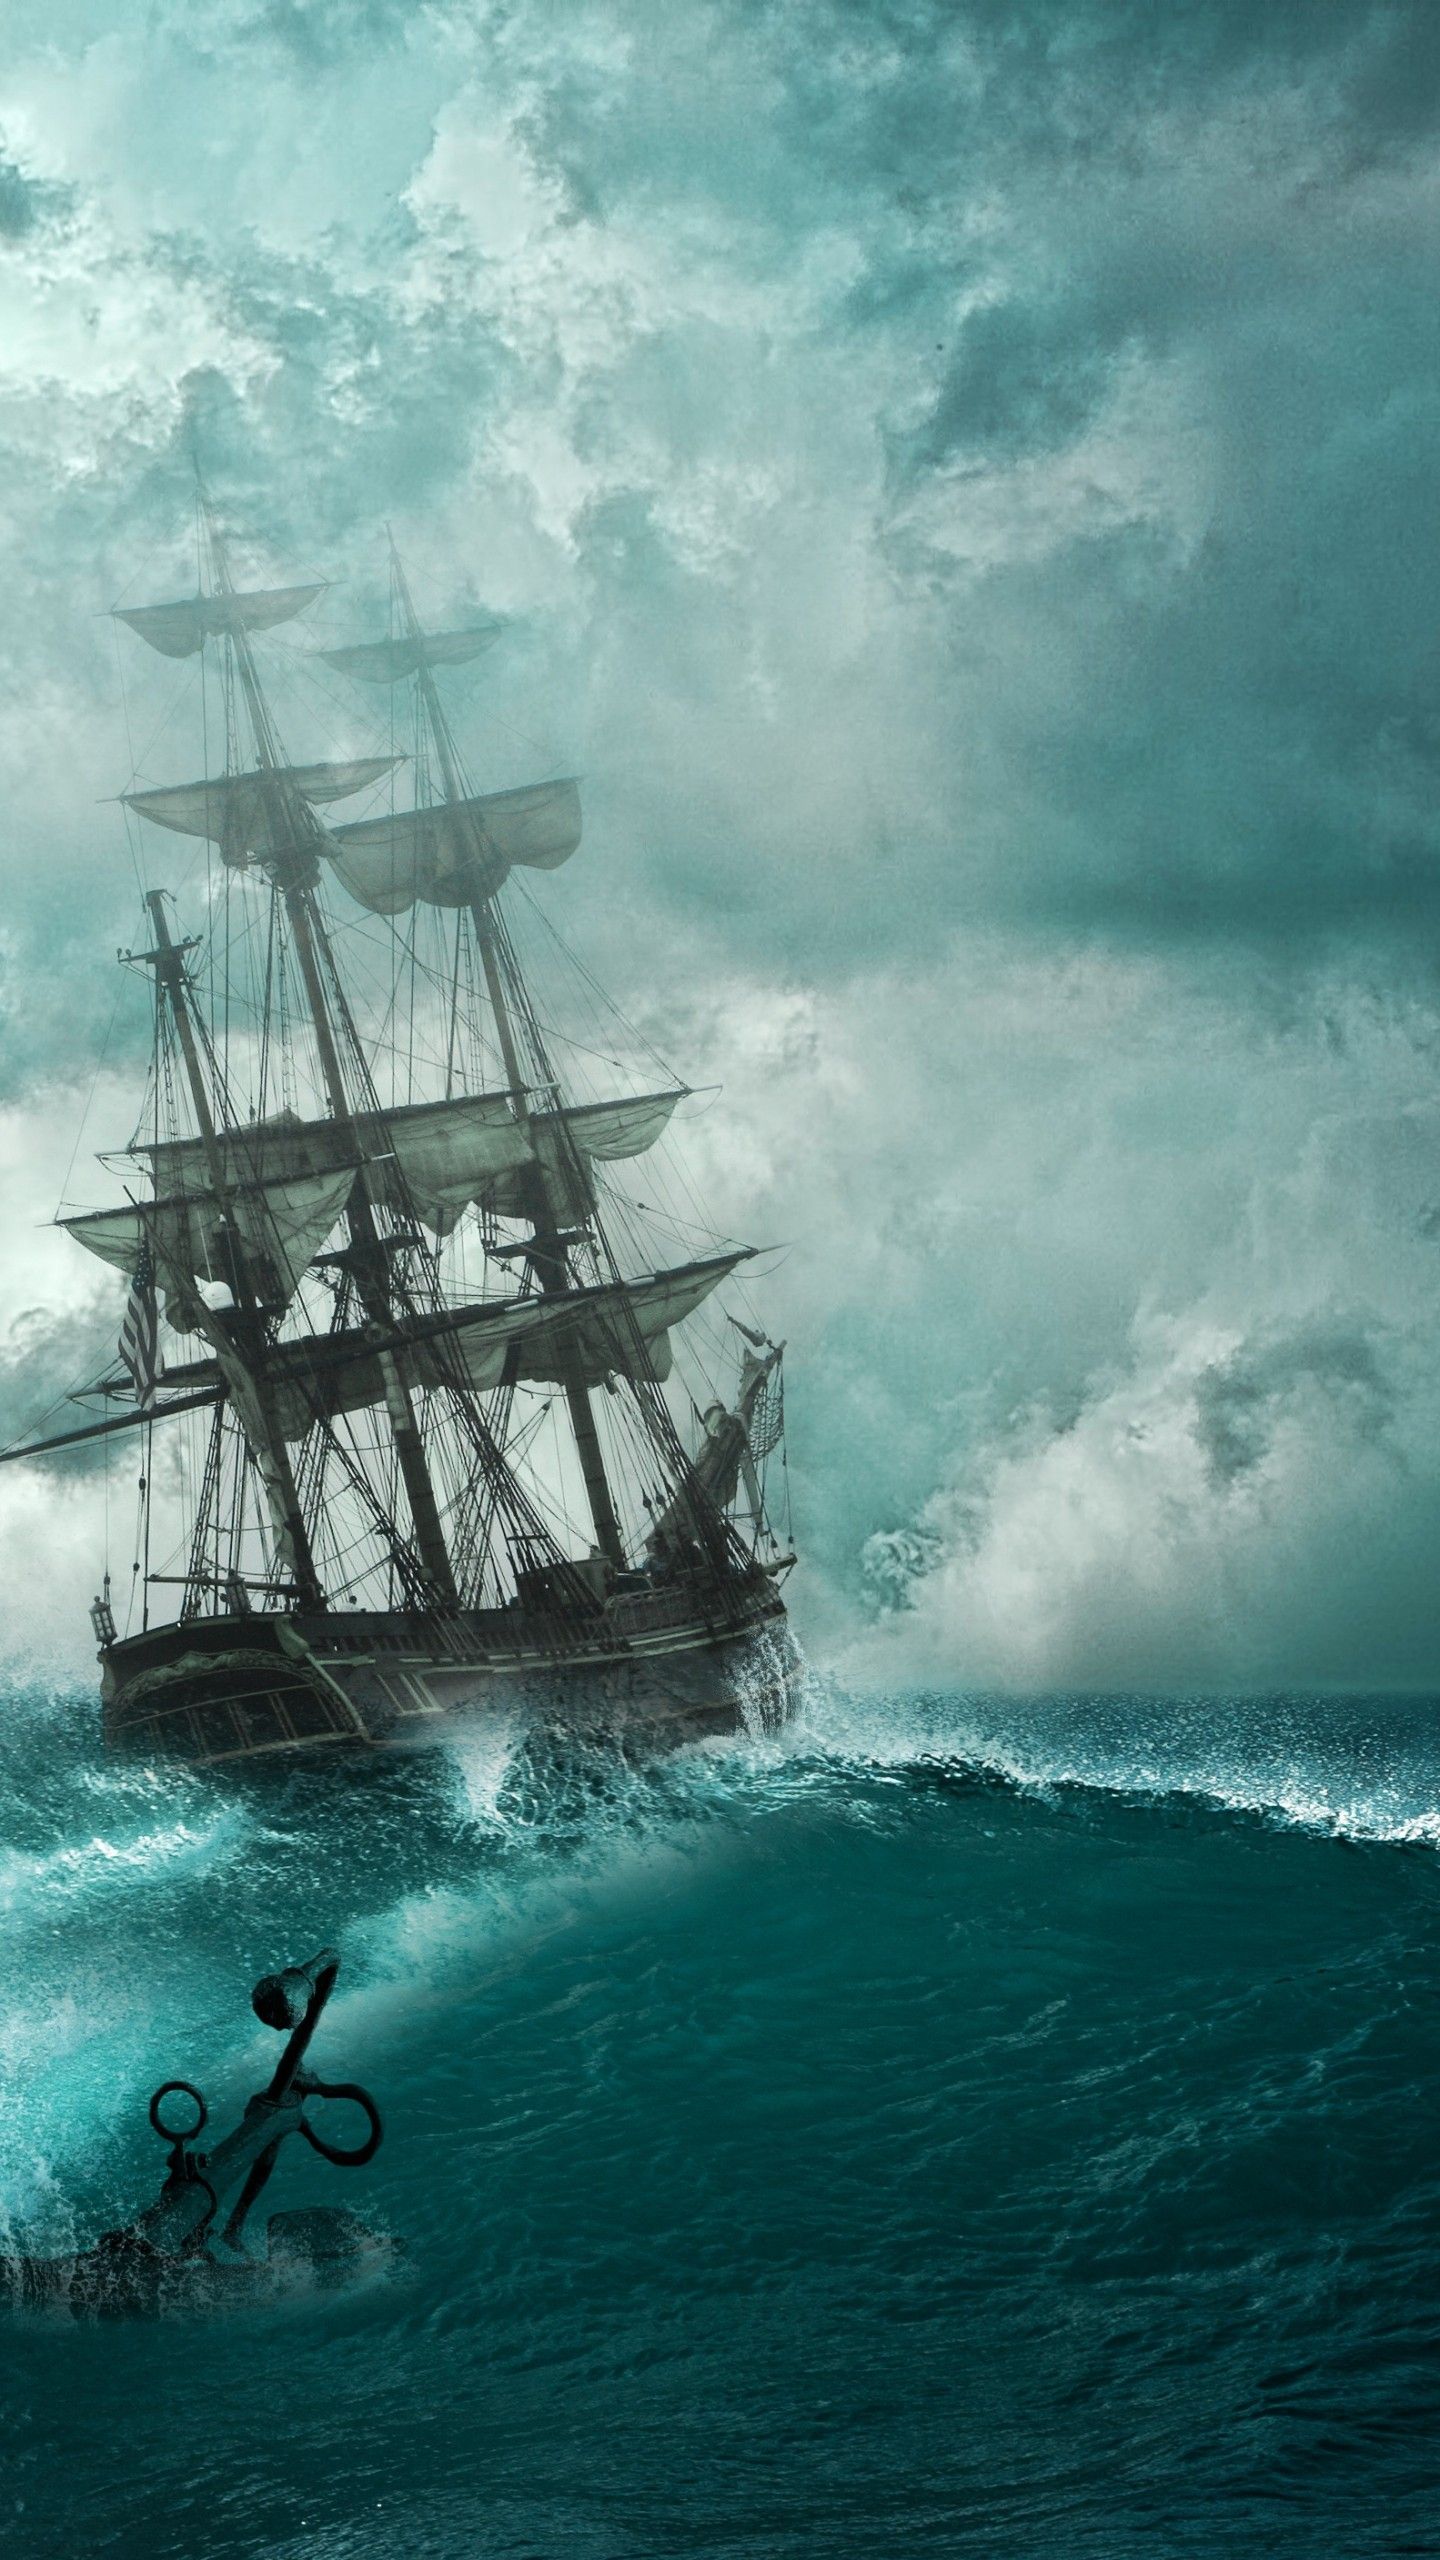 IPhone wallpaper with a ship in the ocean - Pirate